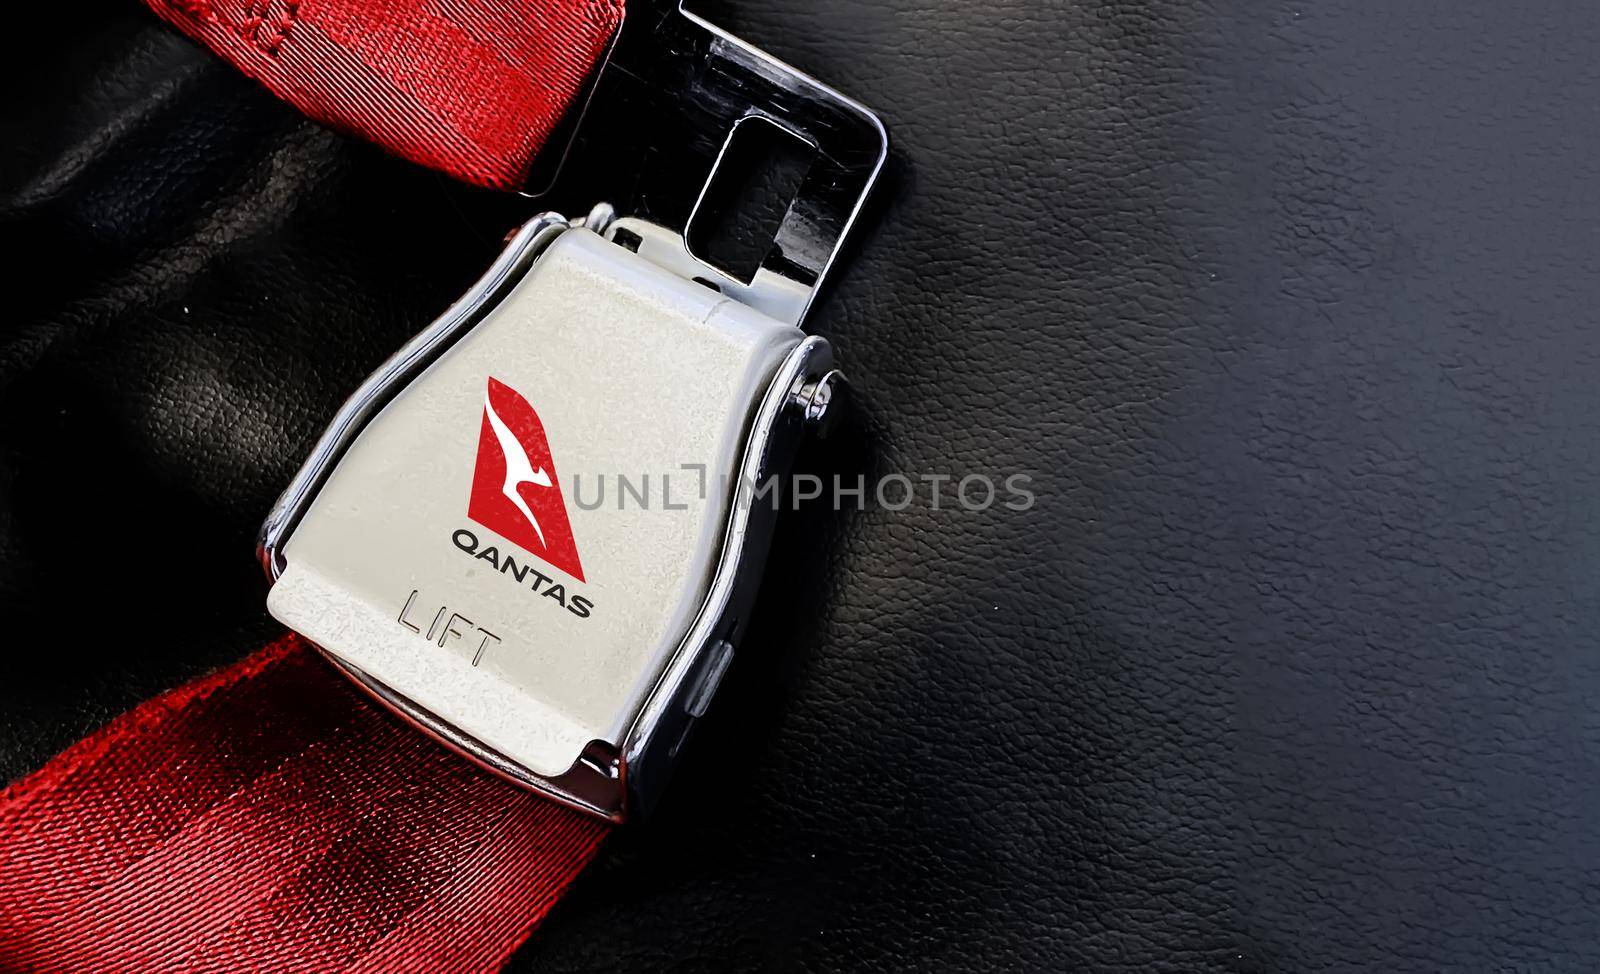 Sydney, Australia, July 2019: Red belt of an empty seat inside an airplane with the Qantas australian airlines logo printed on the metal by rarrarorro